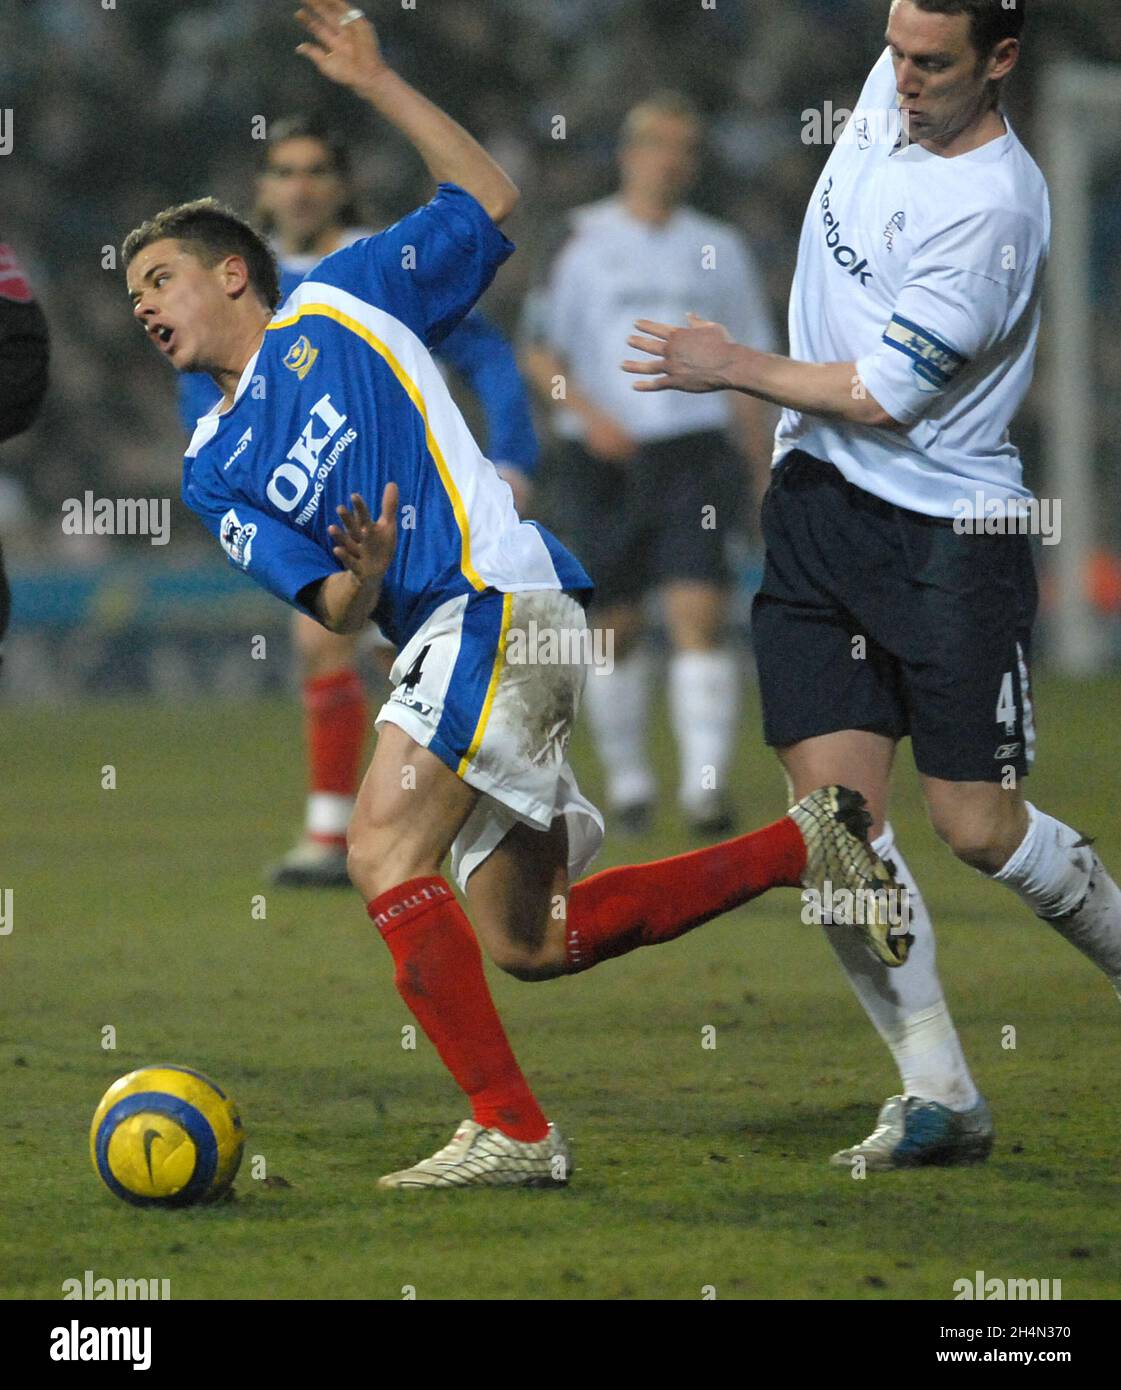 Portsmouth v Bolton 01/02/06 Andres D'Alessandro and Kevin Nolan. Pic MIKE WALKER 2006 Stock Photo